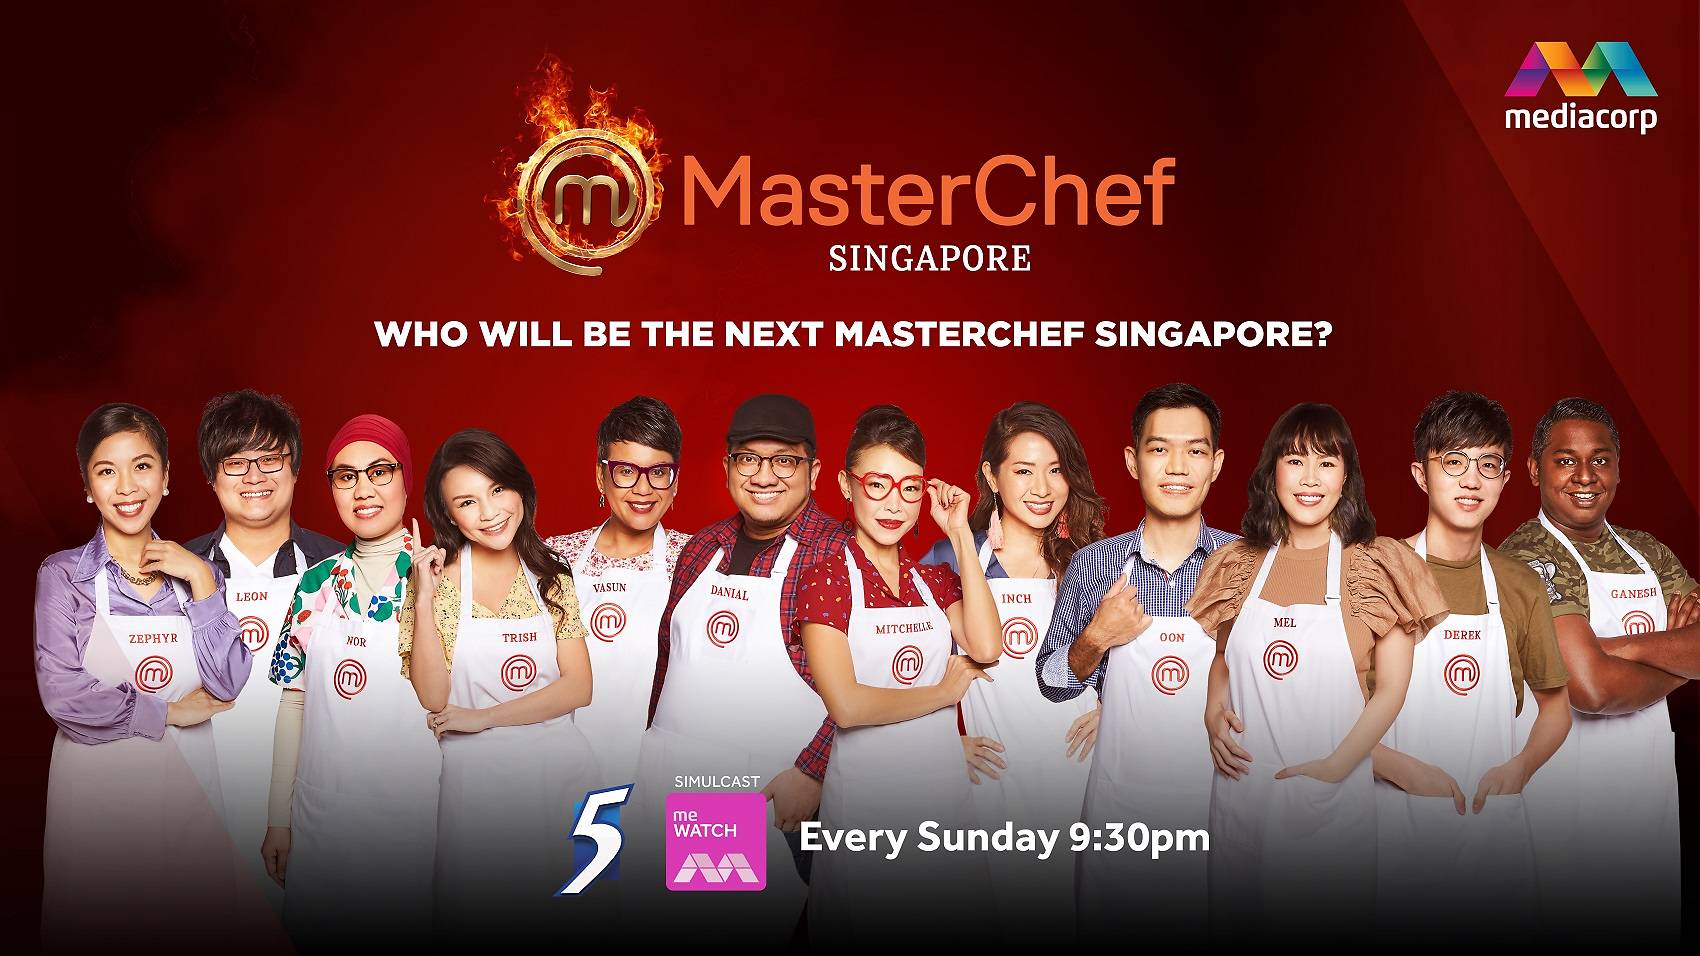 MasterChef Singapore: Season 2’s Top 12 contestants include a singer and a dentist